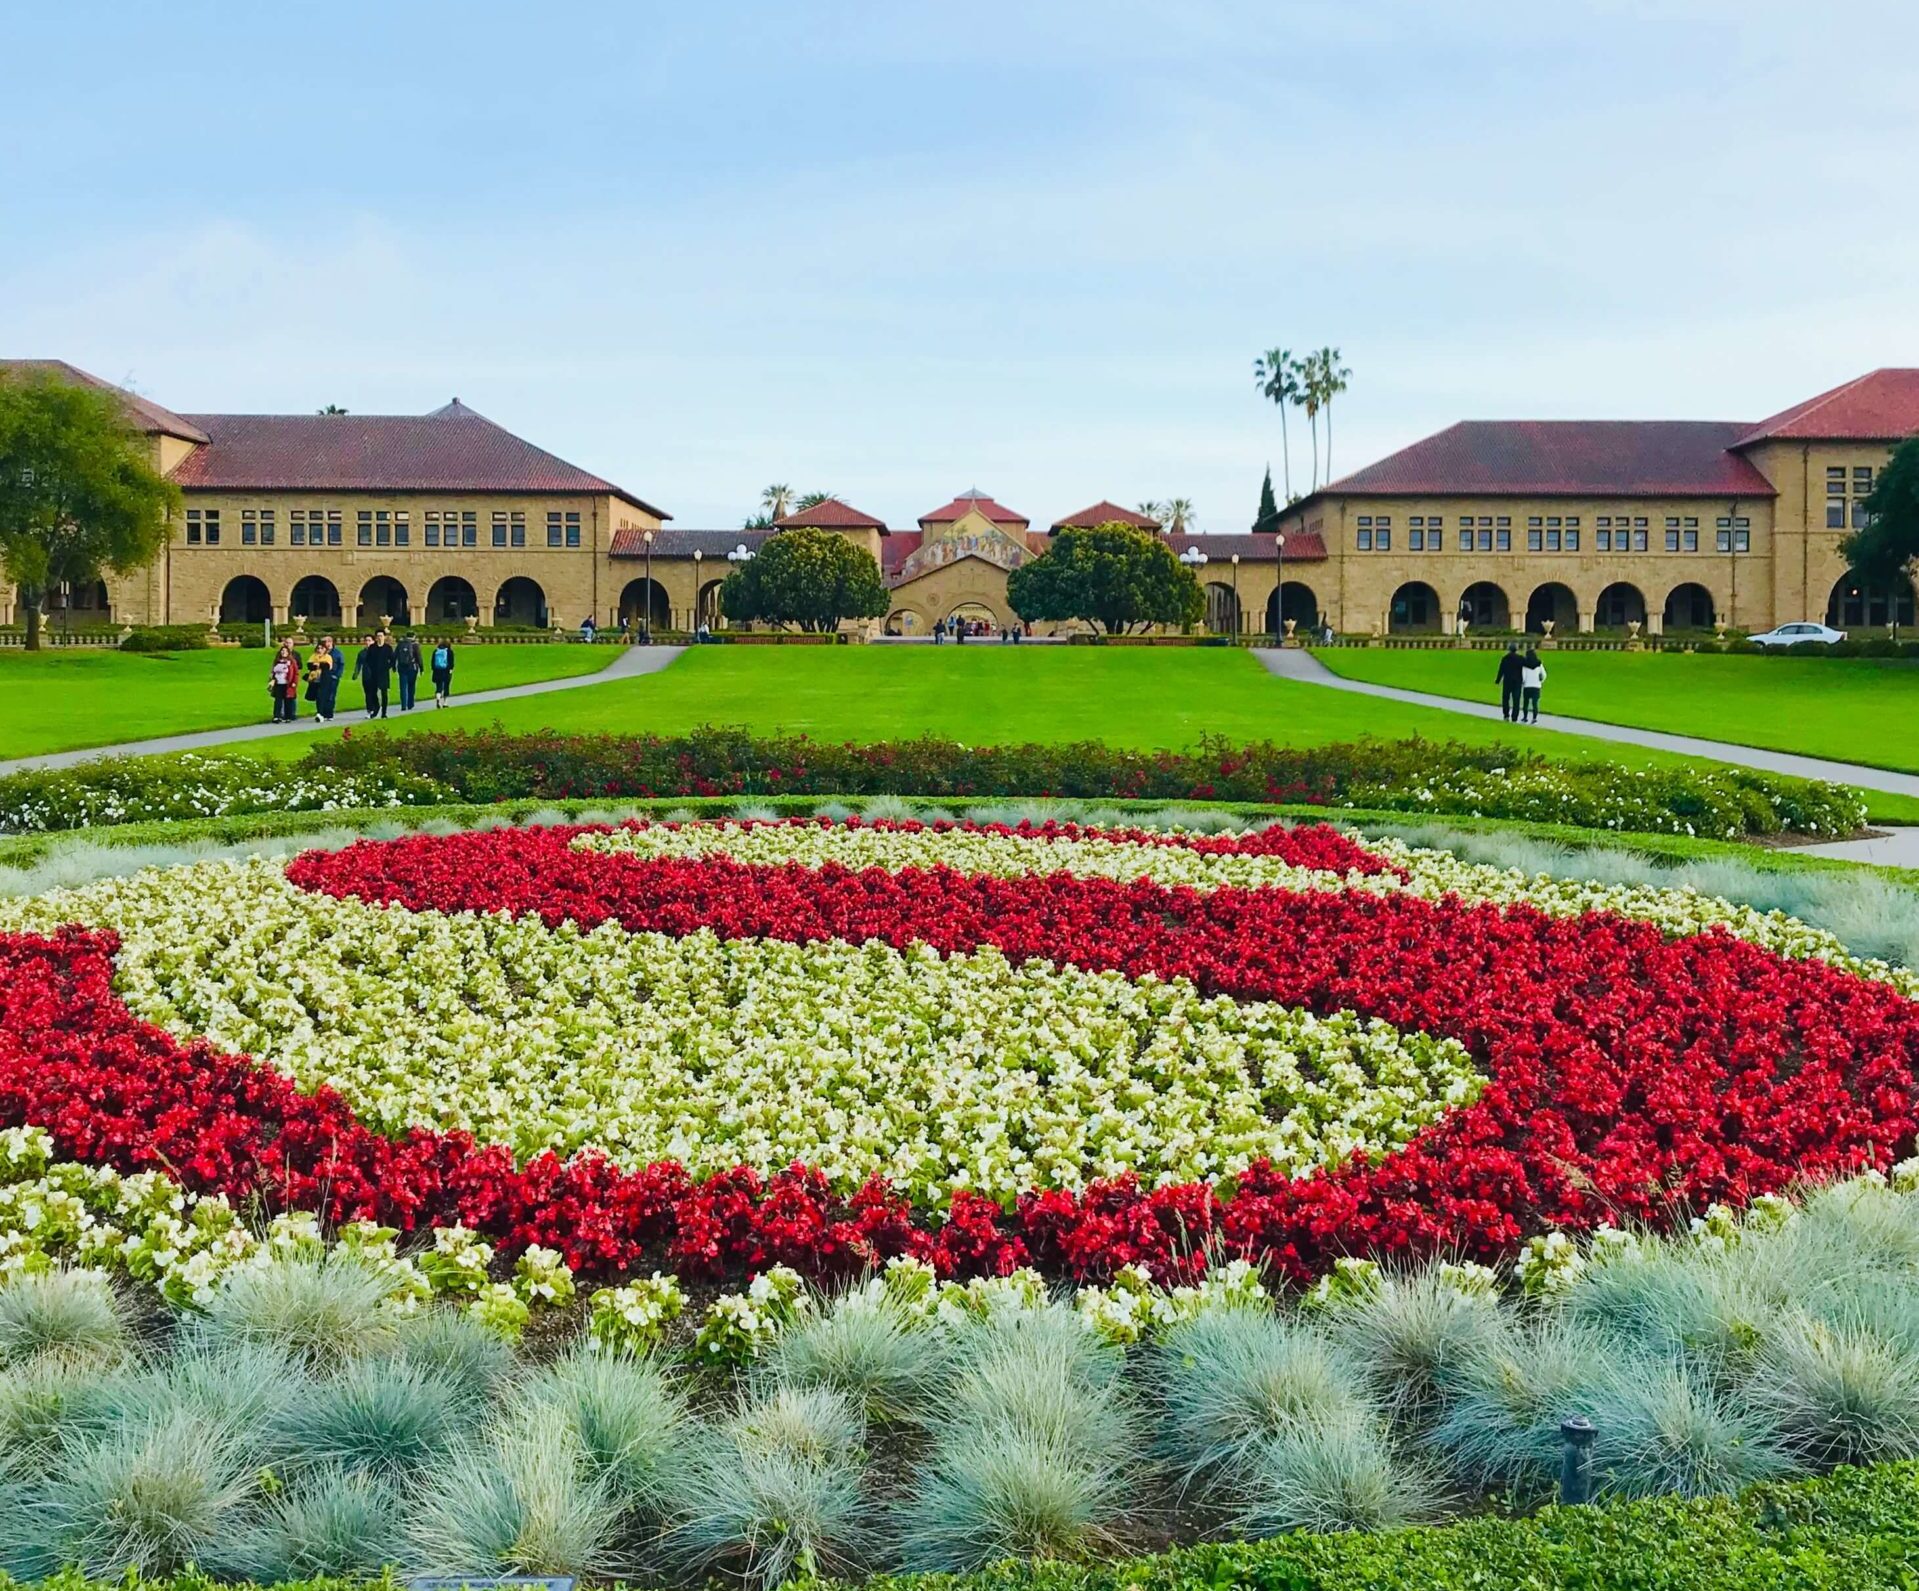 Protecting Stanford University’s students and campus from disruptive weather